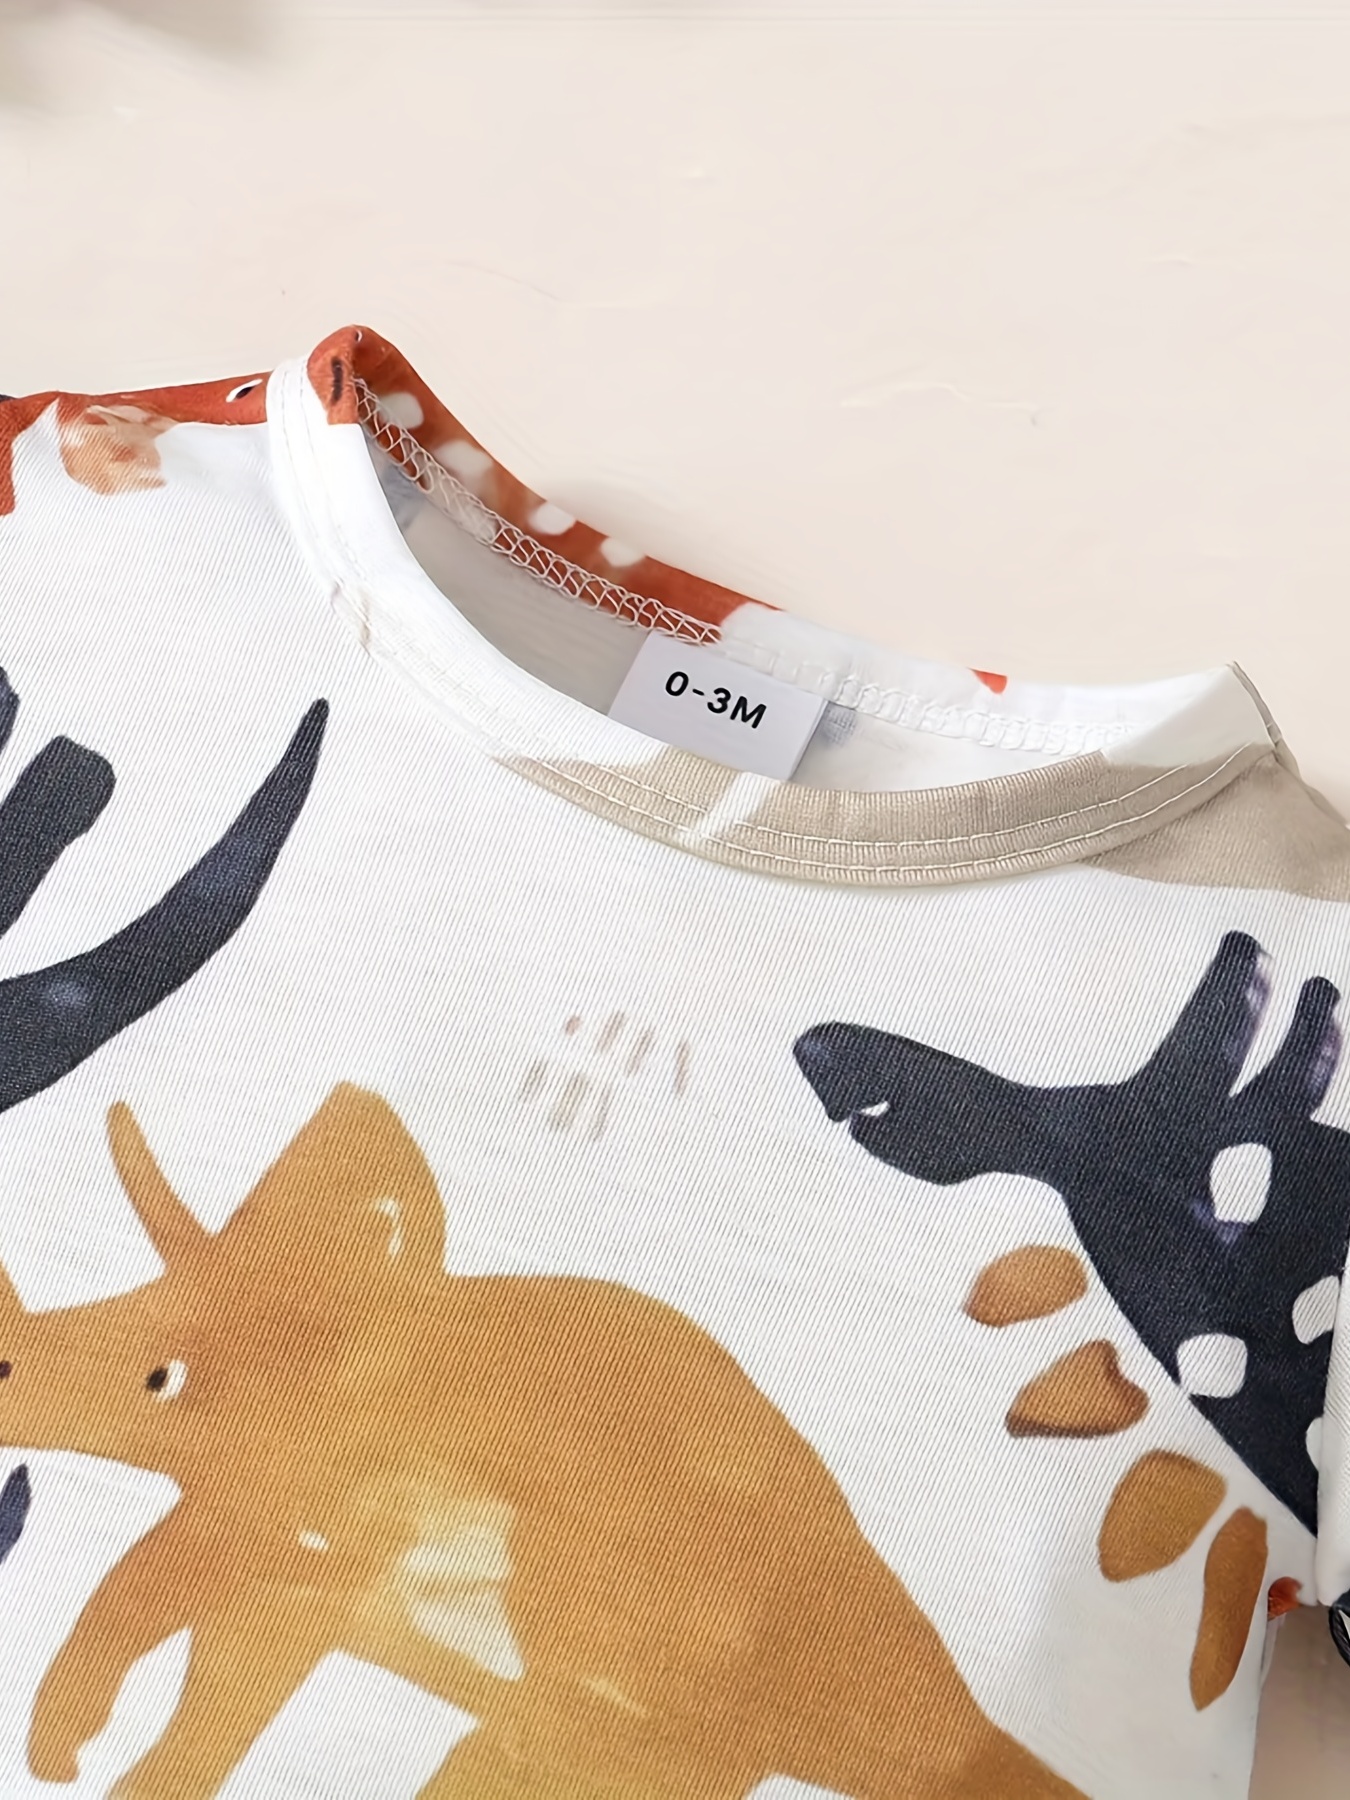 The Cutest Zara and H&M Summer Clothes for Babies and Kids